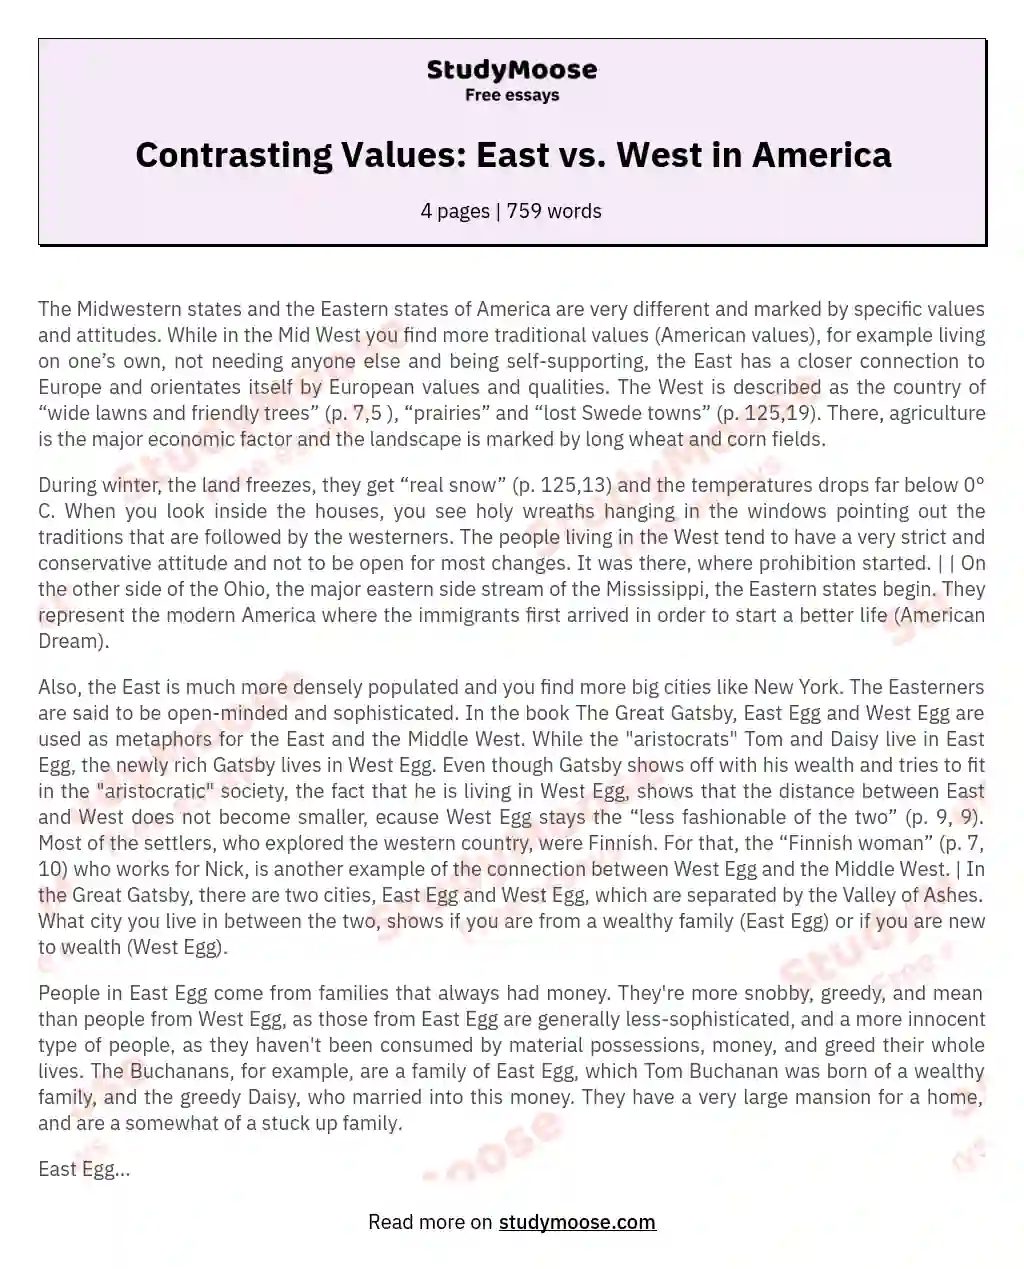 Contrasting Values: East vs. West in America essay